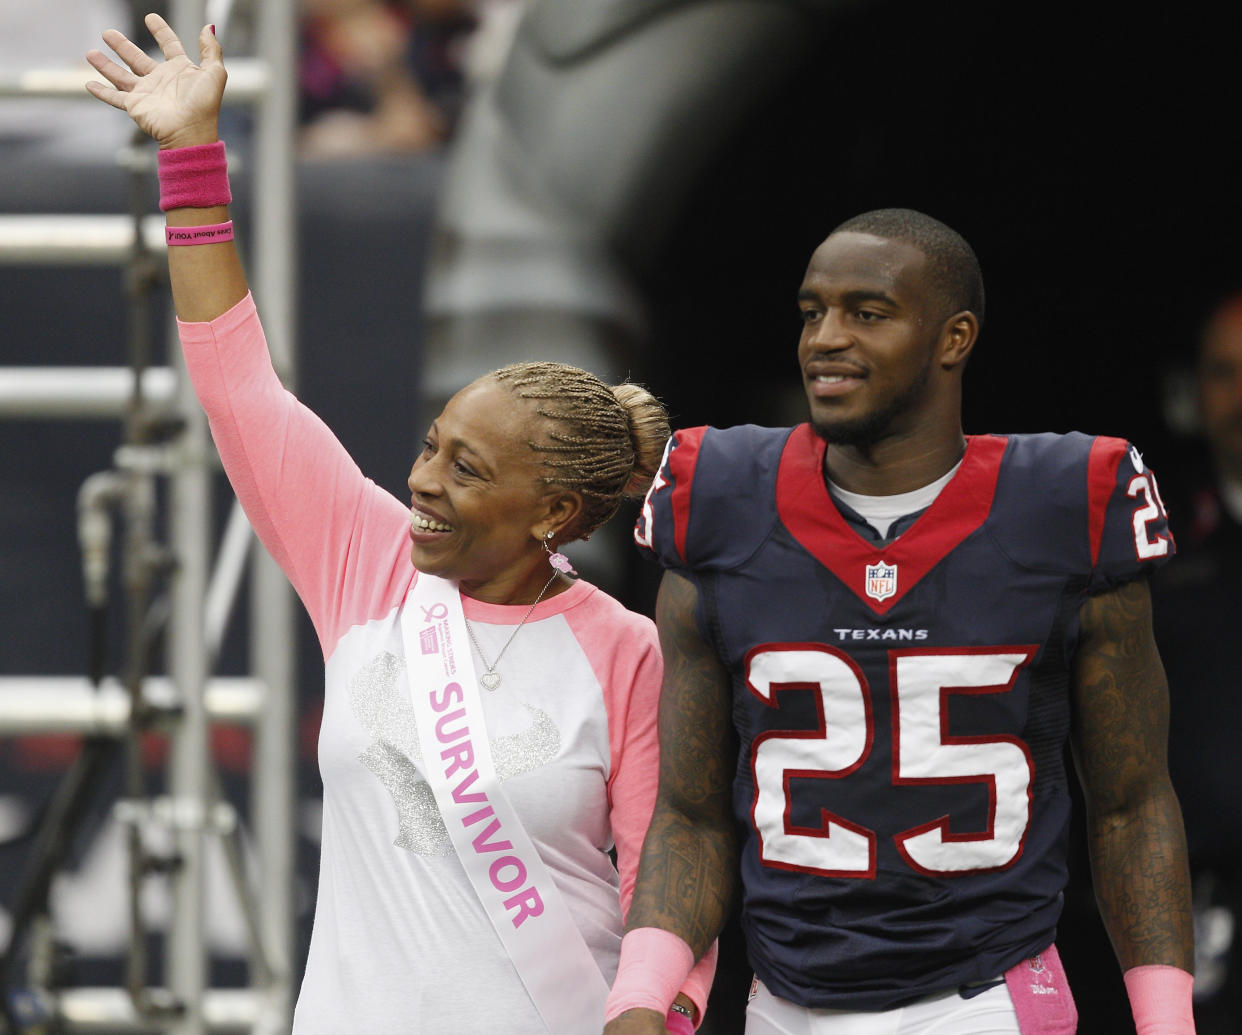 Kareem Jackson of the Houston Texans and his mom, who is a breast cancer survivor, at Reliant Stadium in 2013. (Photo: Bob Levey/Getty Images)